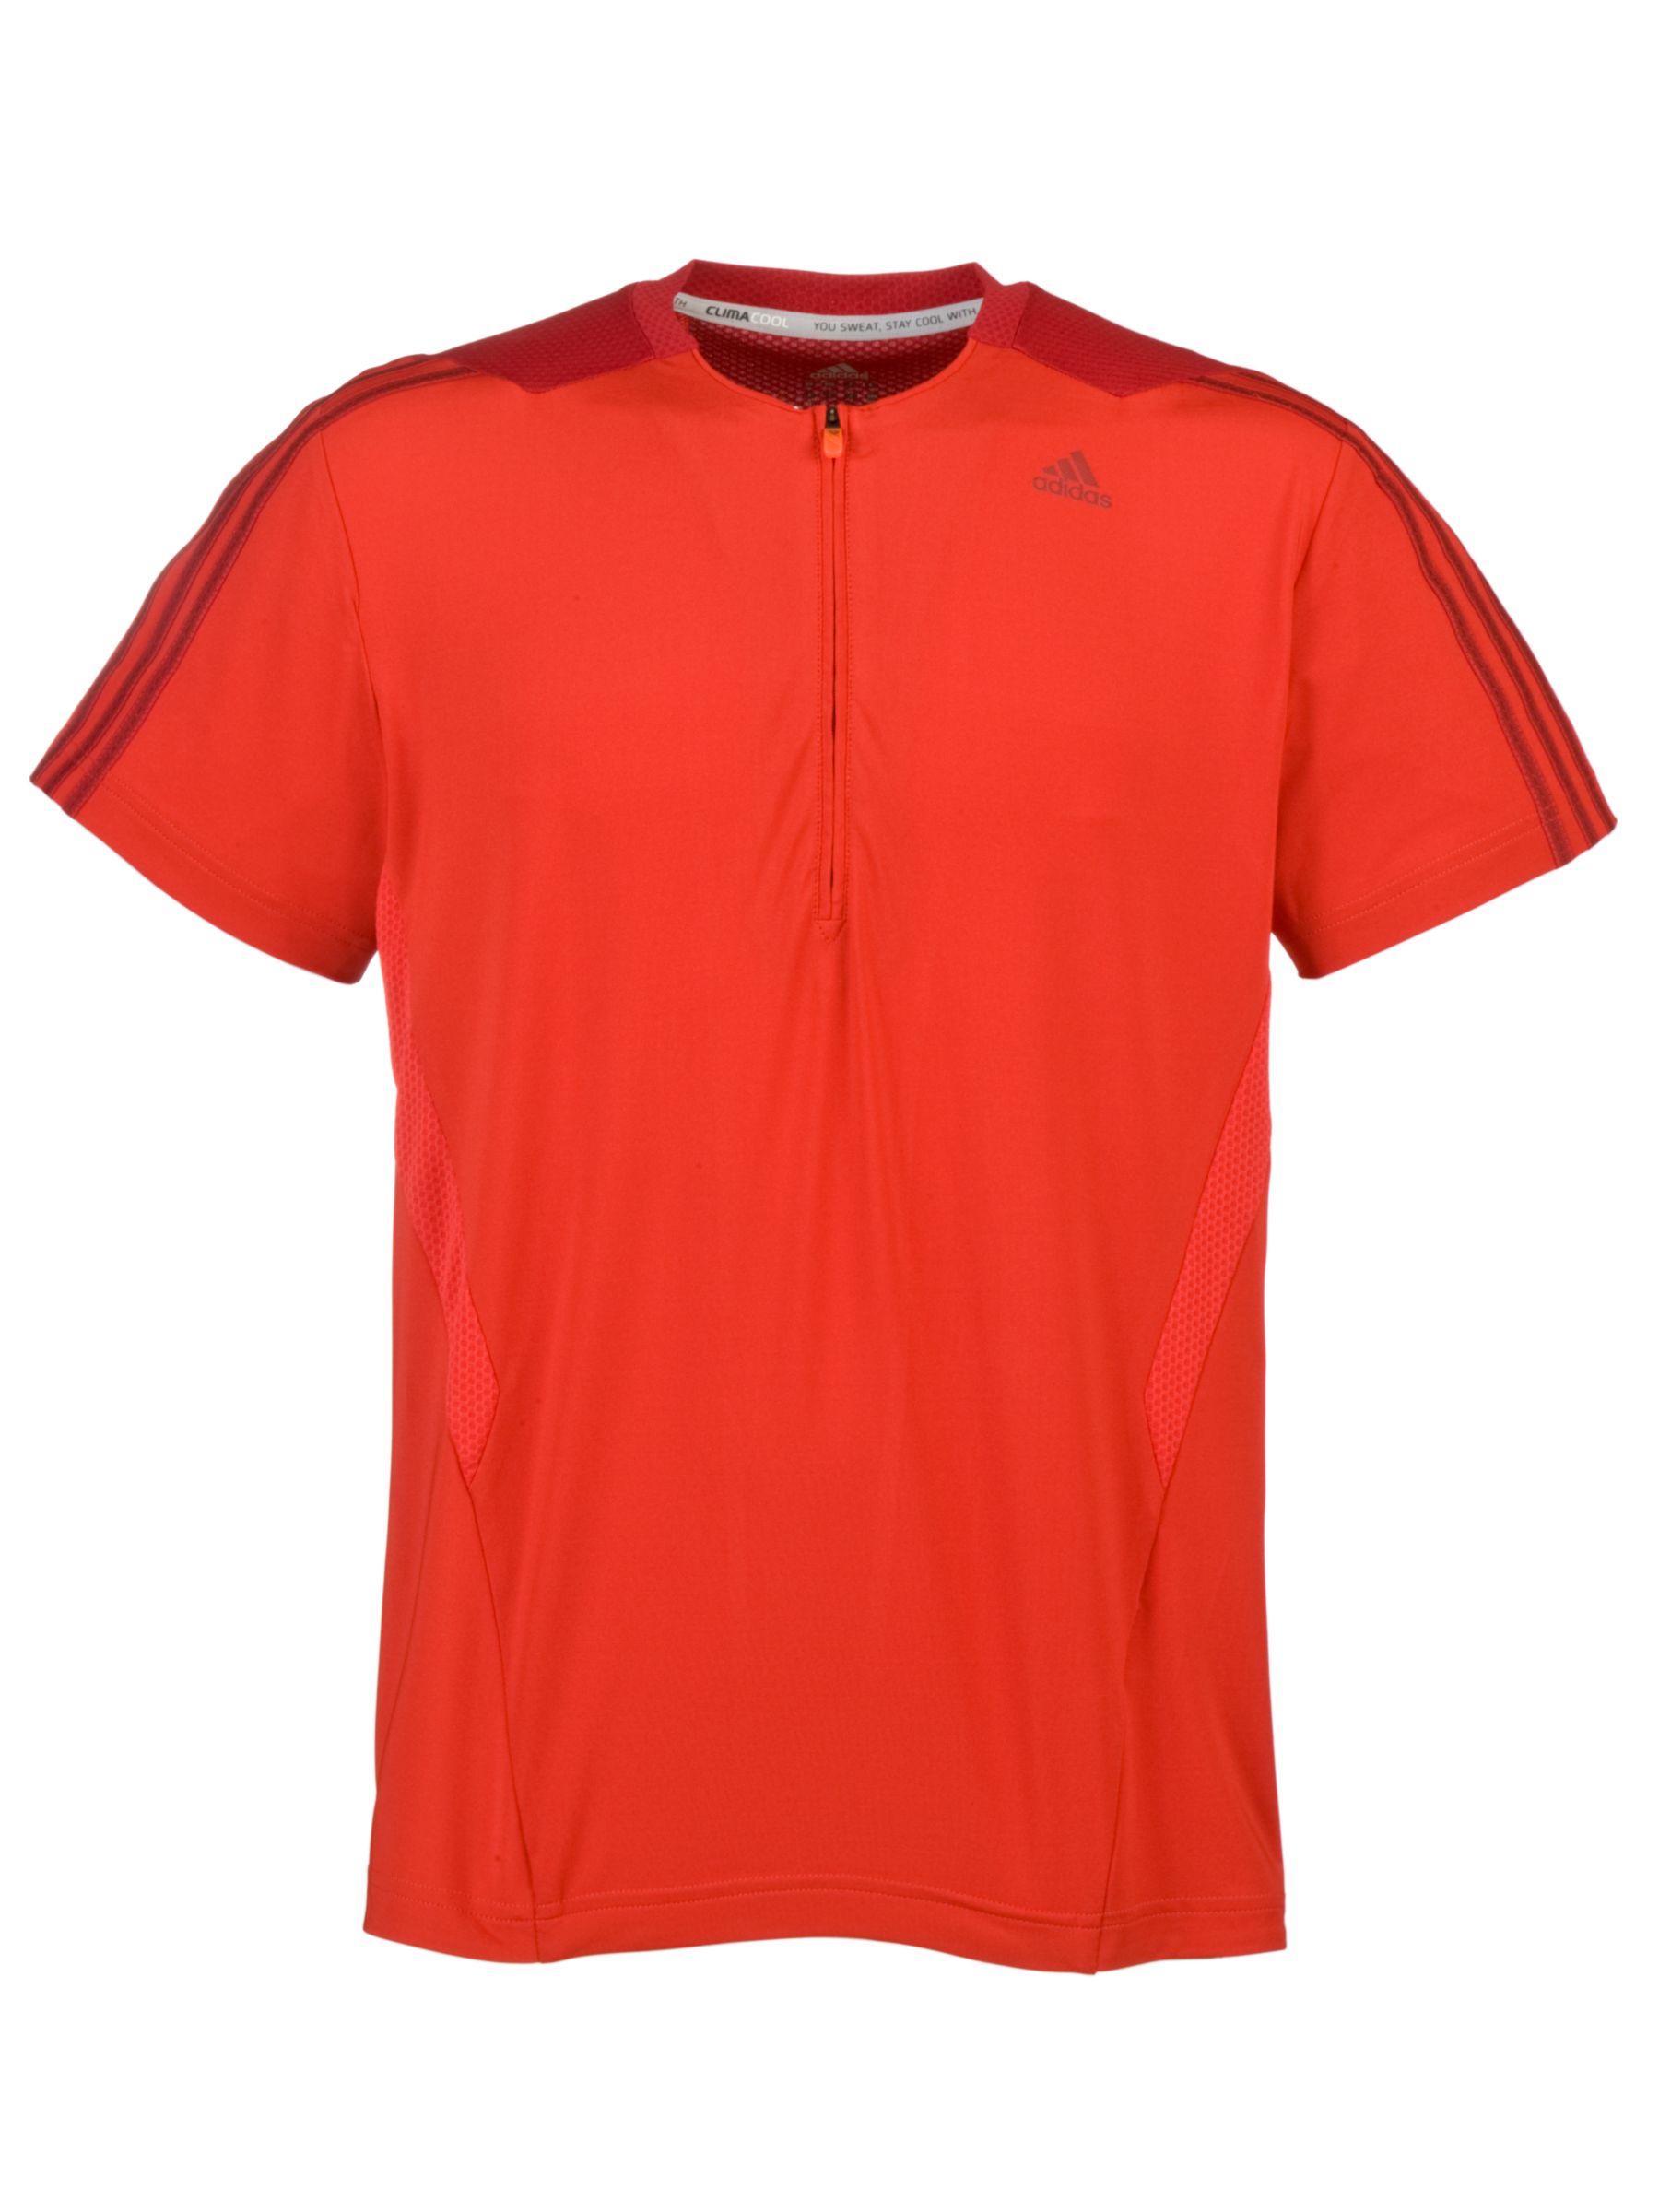 Adidas Clima365 Indoor Cycling T-Shirt, Red